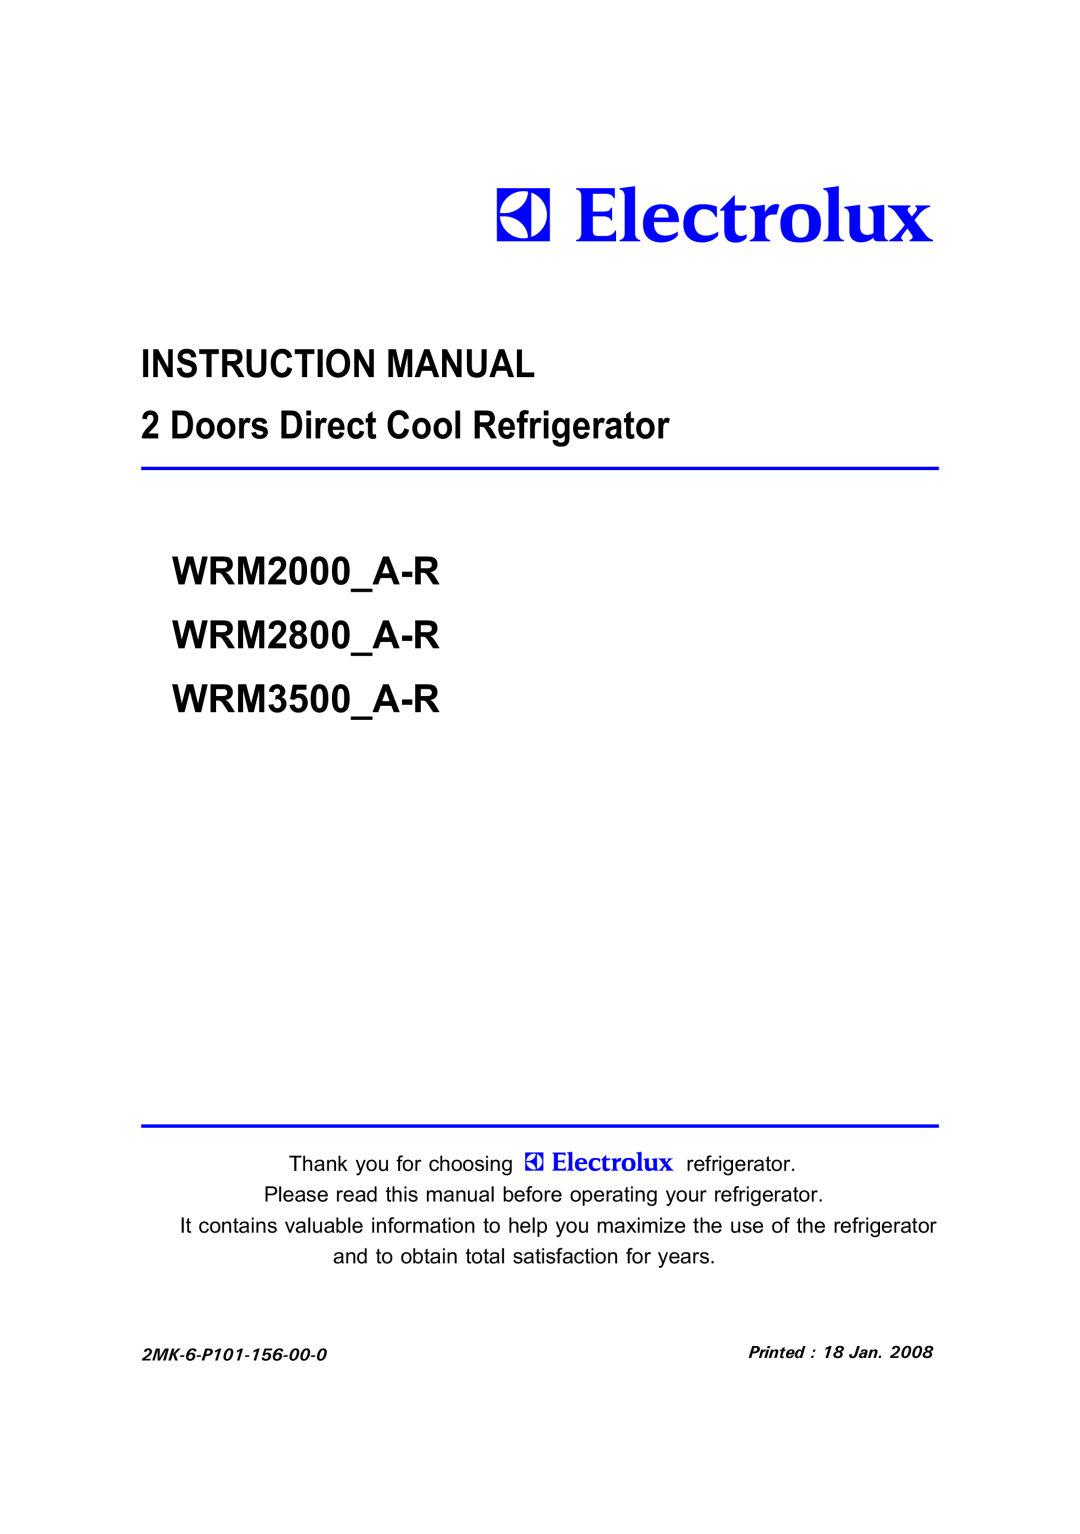 Electrolux WRM3500_A-R instruction manual INSTRUCTION MANUAL 2 Doors Direct Cool Refrigerator WRM2000A-R, Printed 18 Jan 